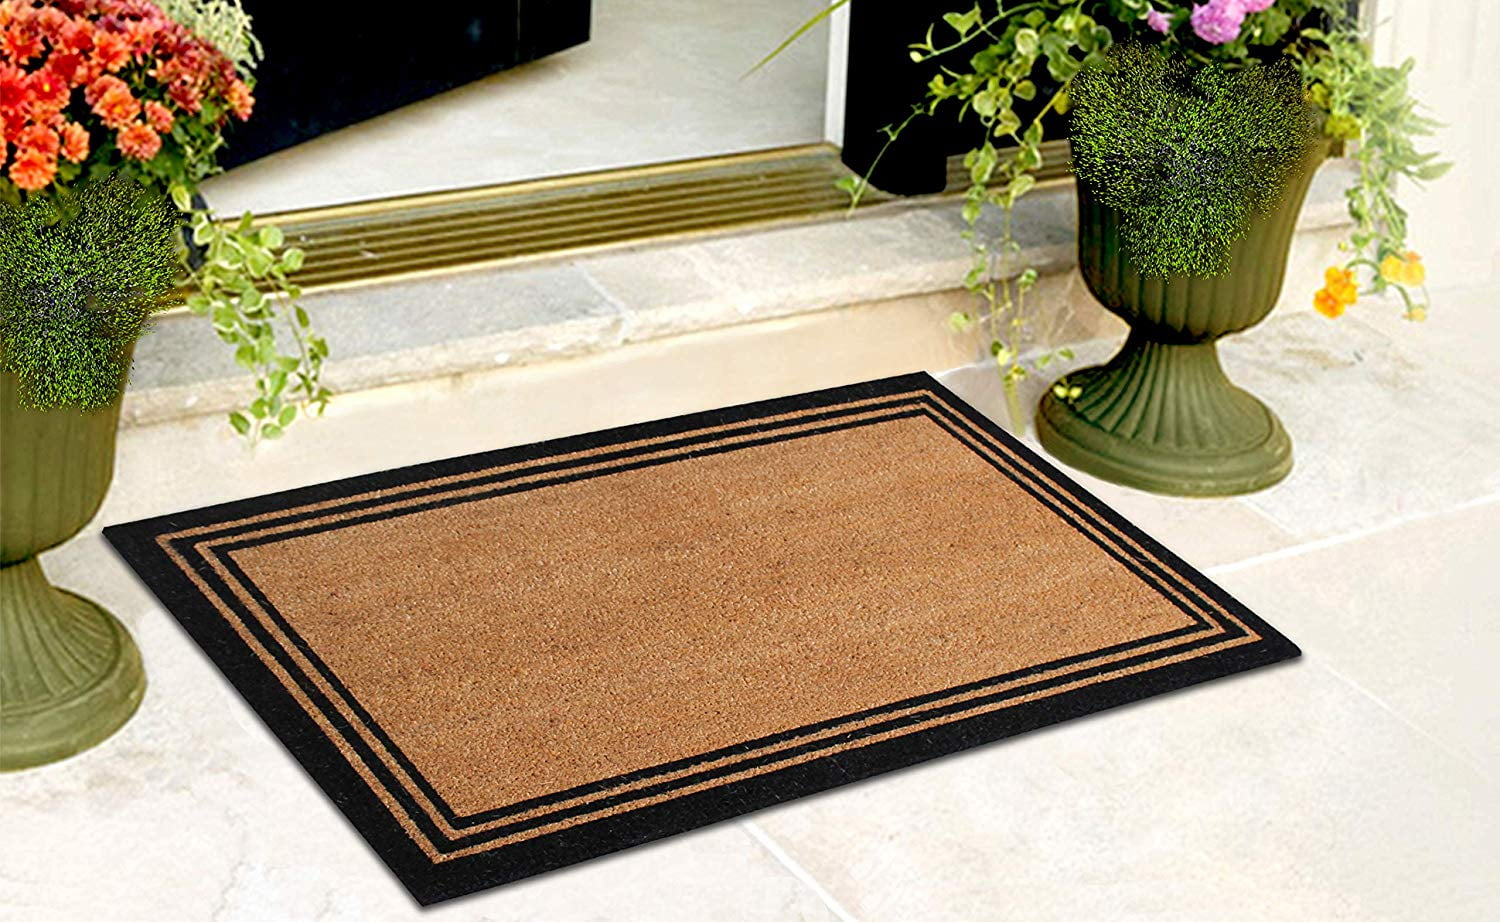  Cute Peacock Coir Door Mat with Heavy Duty Backing Outdoor Mats  for Back Door Waterproof Natural Doormat Pretty Farm Animal Green Peacock  Vintage Flowers Welcome Mats Outside Decor 16x24in : Patio